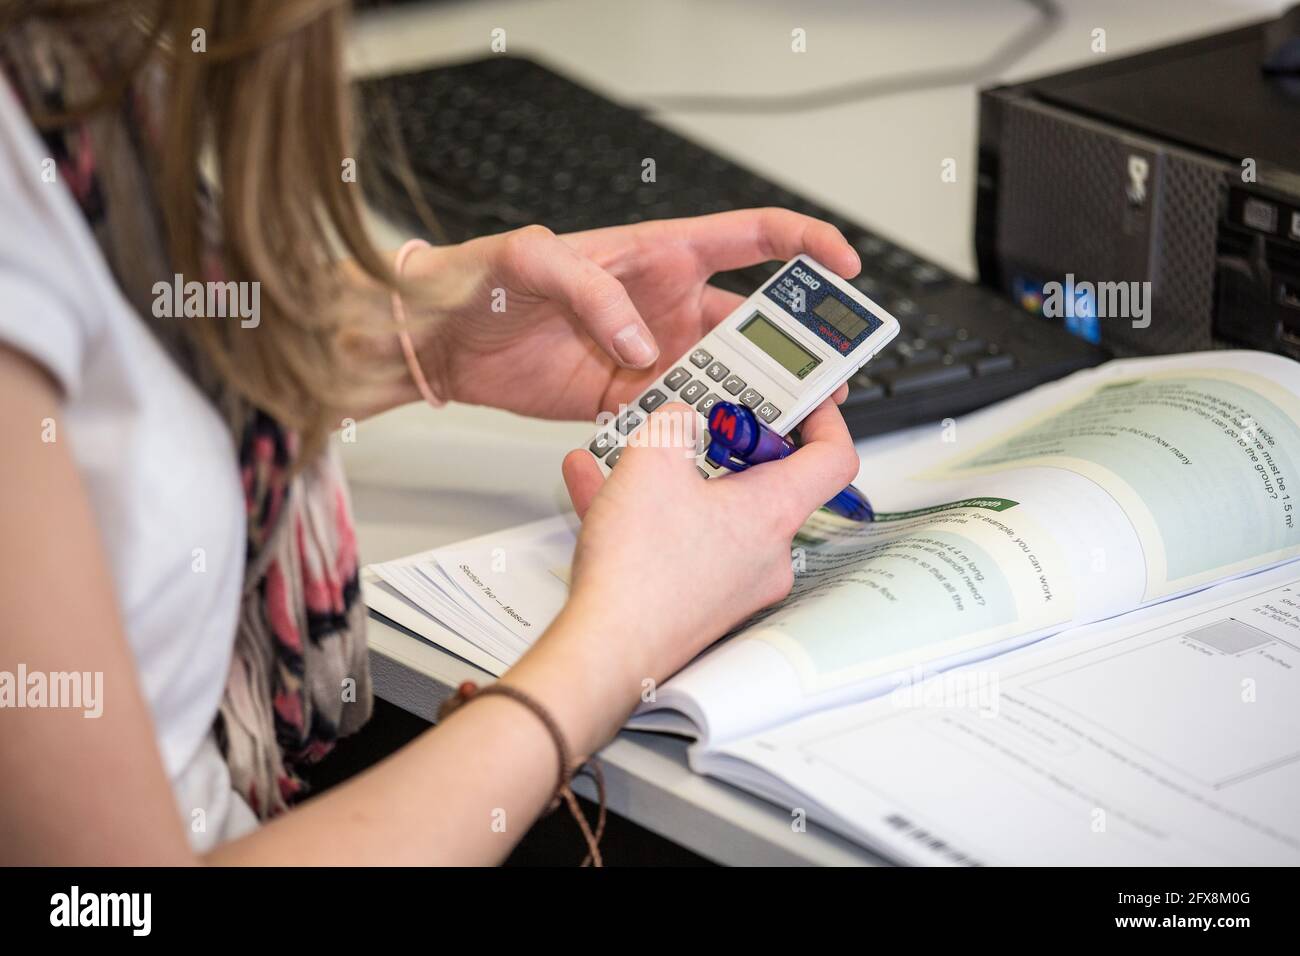 London, UK - CIRCA 2014 March - A Caucasian female using a calculator while solving maths problems Stock Photo